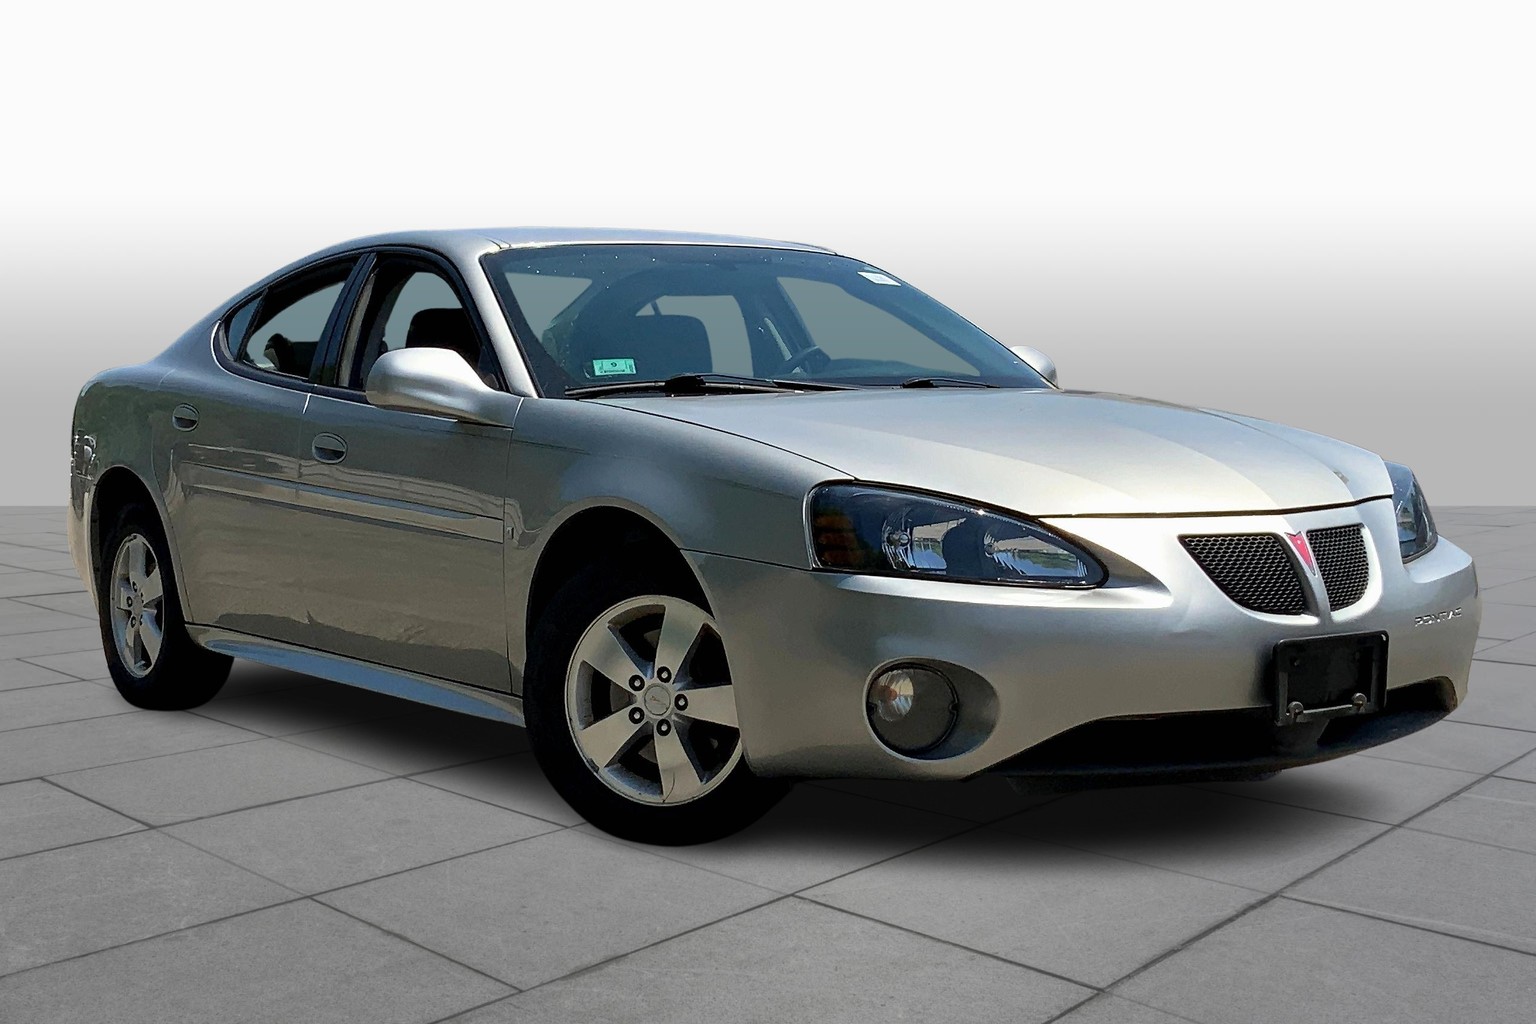 Used 2008 Pontiac Grand Prix GP with VIN 2G2WP552X81117828 for sale in Stratham, NH